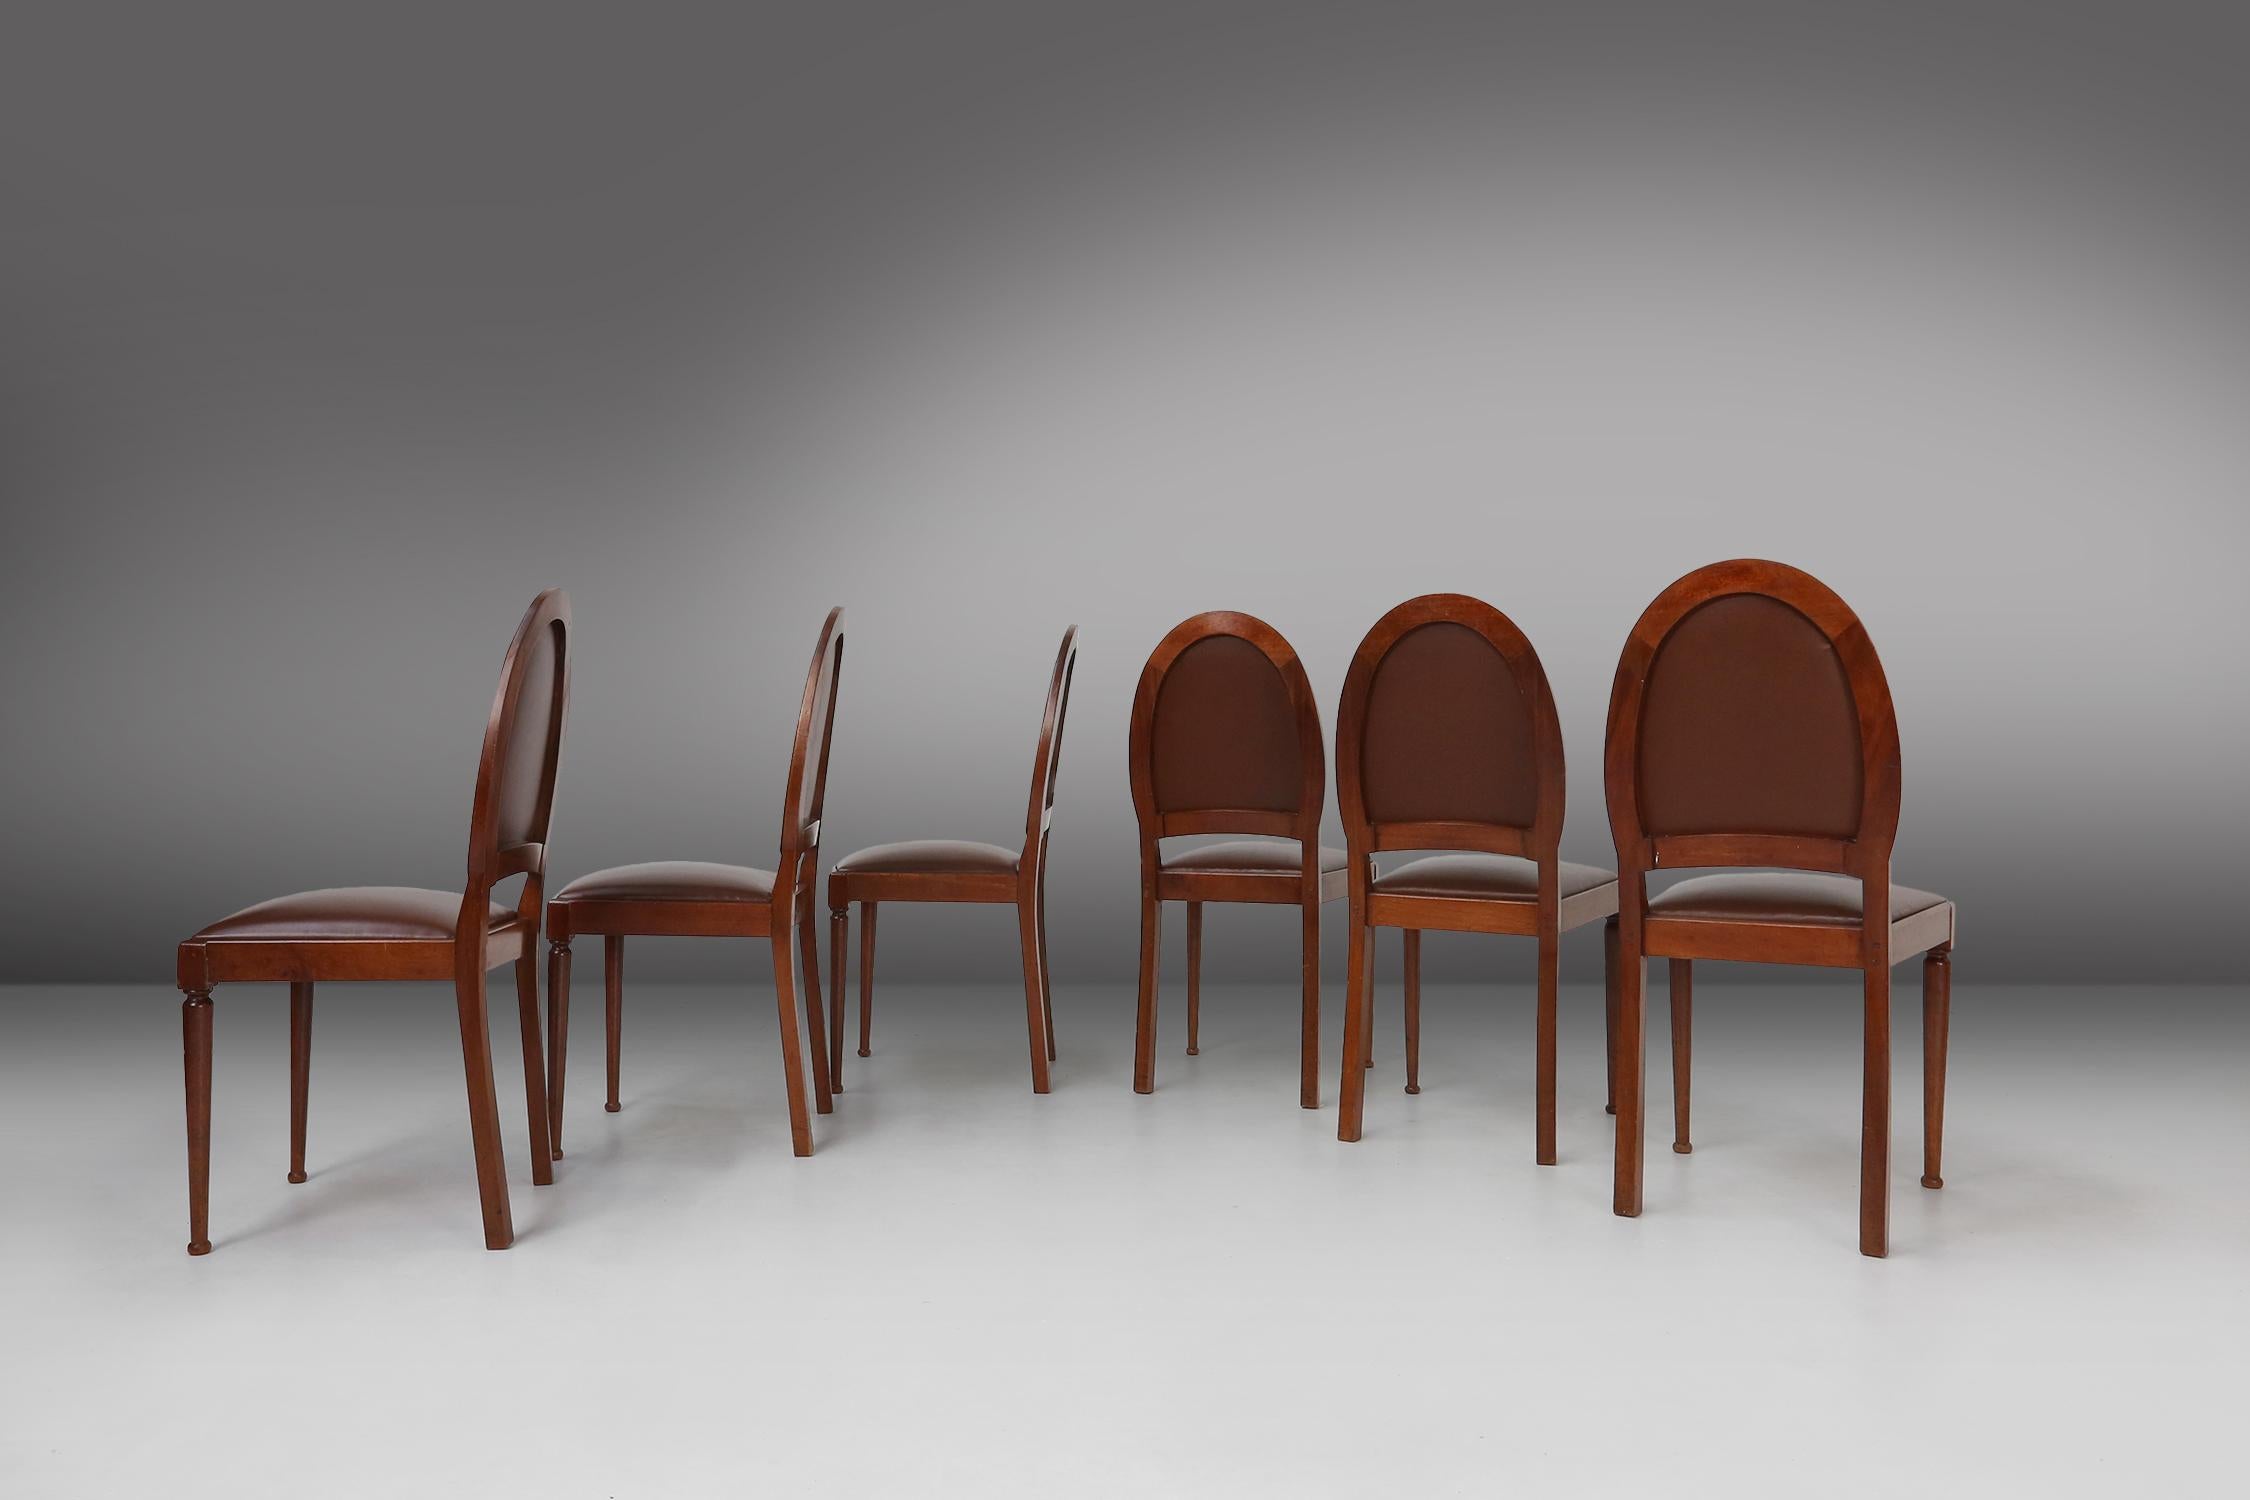 This set of six art deco chairs made by De Coene in Belgium in 1930. The chairs are made of full wood and have a brown leatherette seat. They have the typical art deco style, with a curved back and elegant lines. These chairs are a perfect example